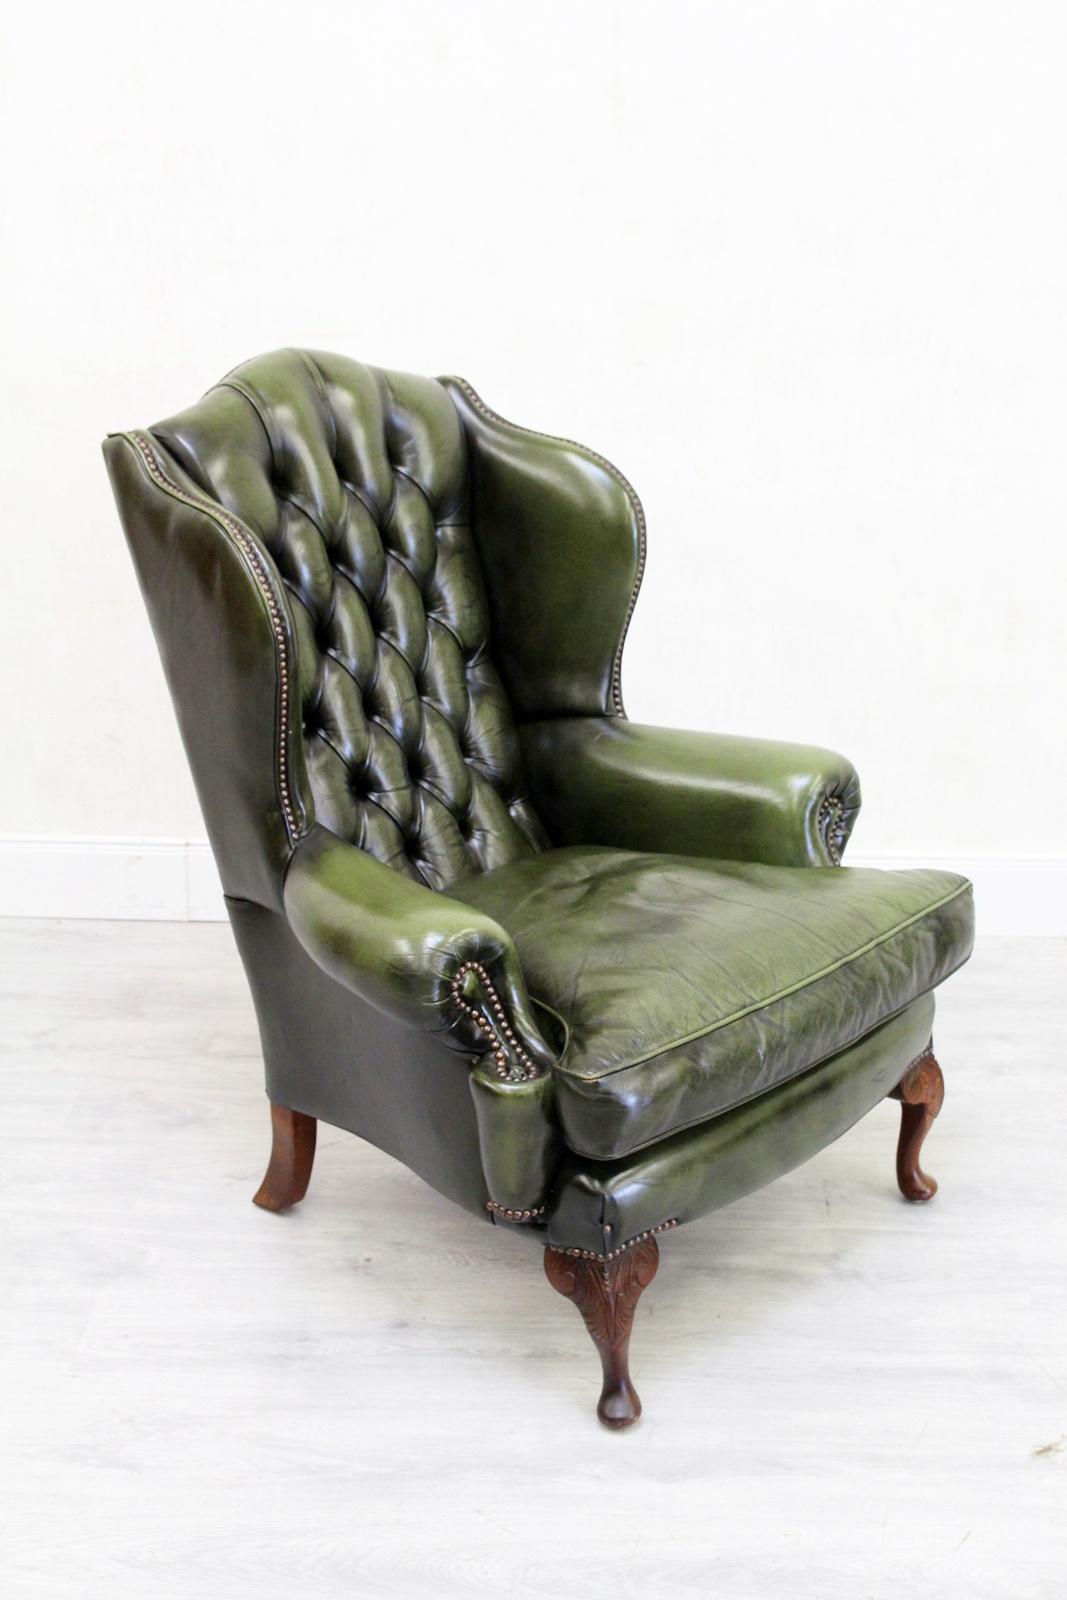 Chesterfield armchair
The shape is Classic (wing chair)
Armchair
Measures: H x 105 cm, W x 85 cm, D x 95 cm
Color green
Pillows: Down pillows
Condition: The chair is in a very good condition for the age and still has the charm of the 